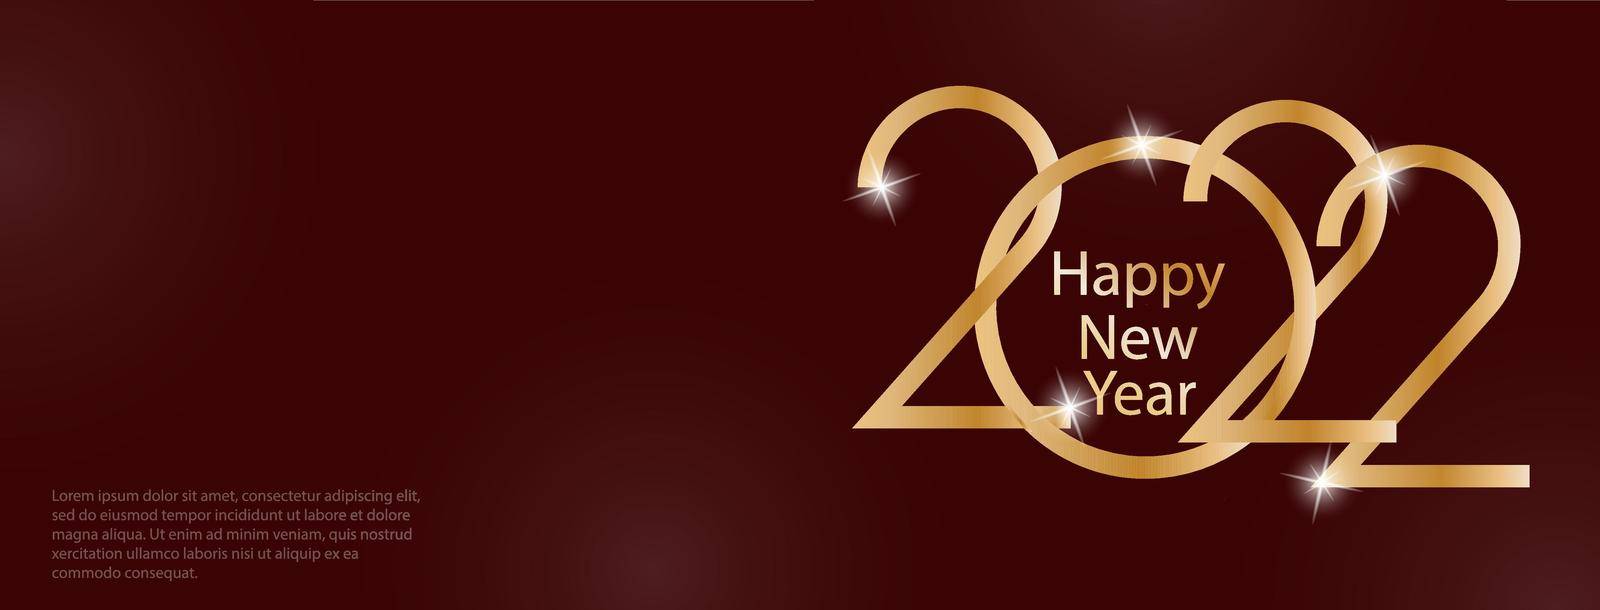 2022. Happy New Year. Greeting gold lettering for cards, banners, posters and creative designs. Vector illustration.